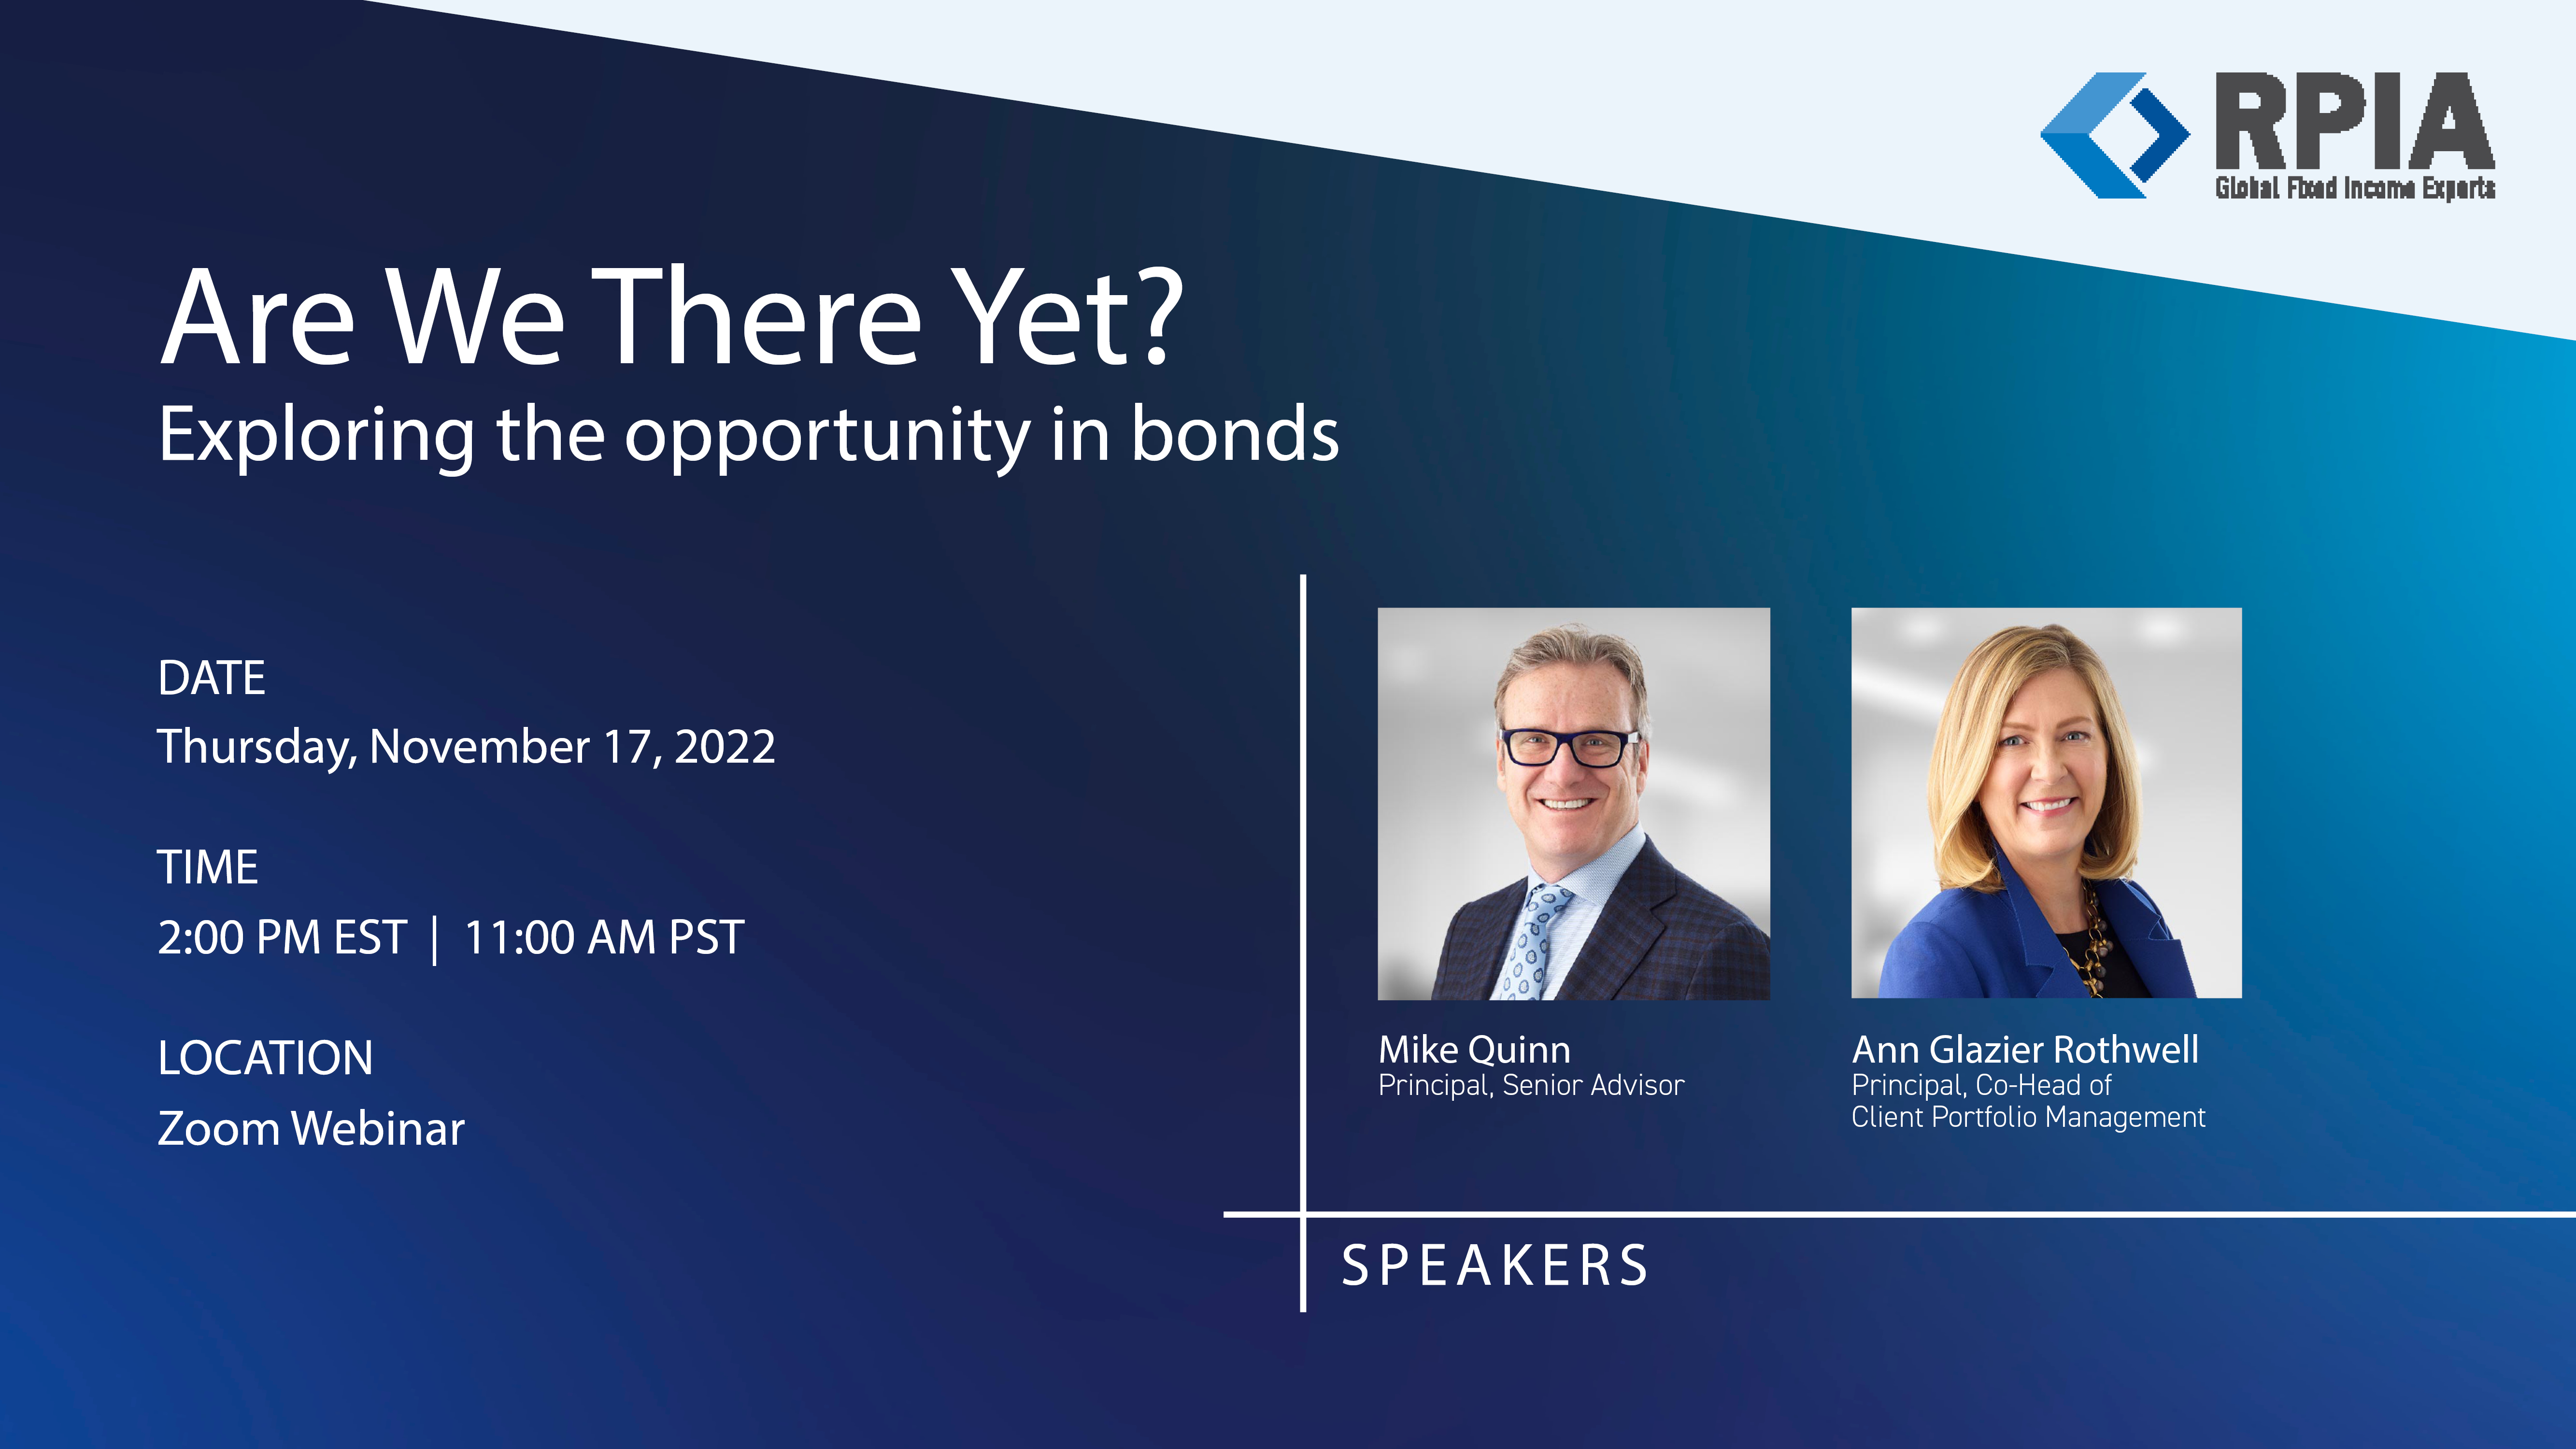 Are we there yet? exploring the opportunity in bonds